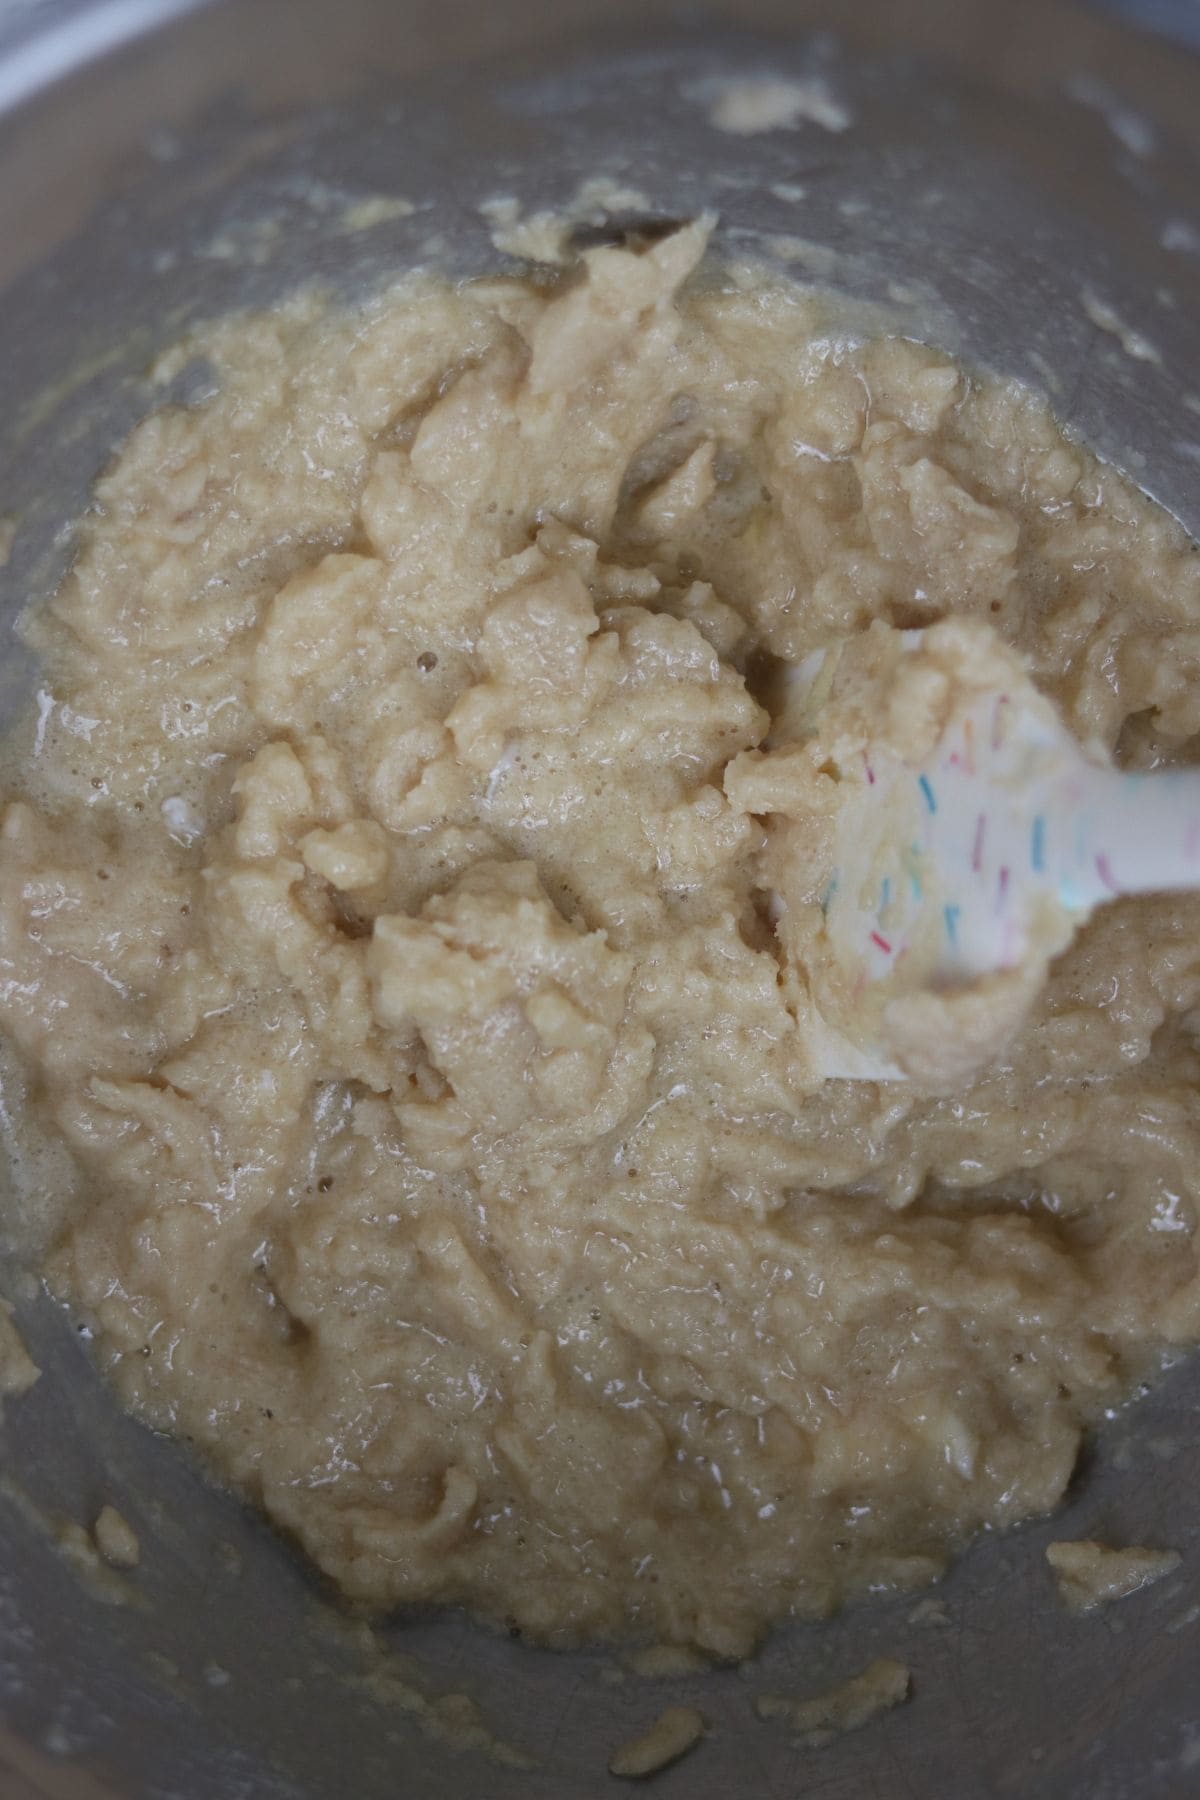 after added egg, vanilla, and milk